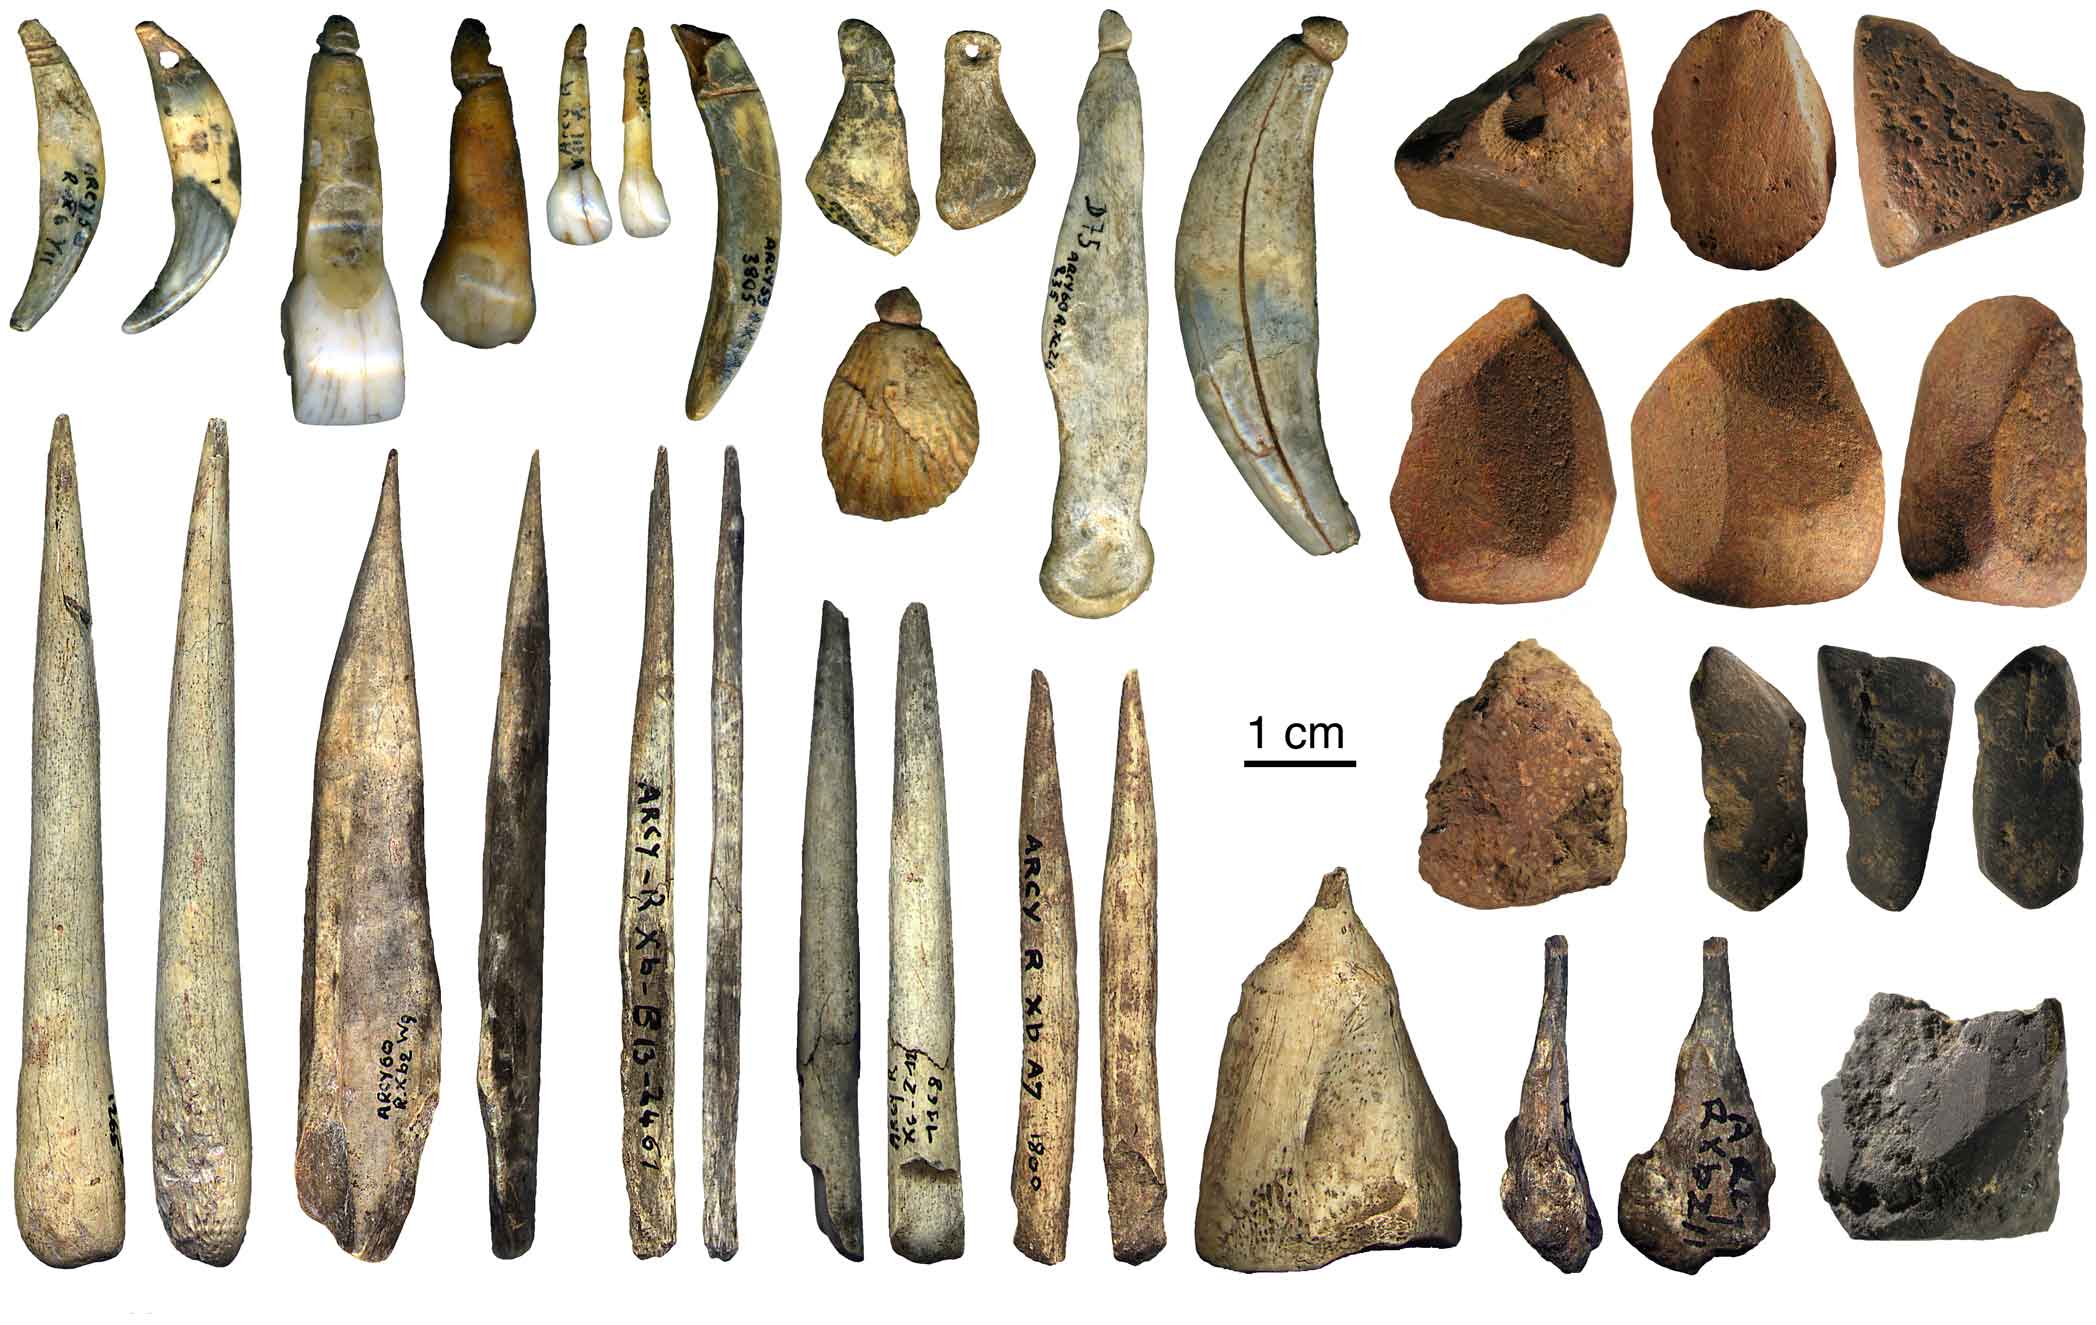 A large number of tooth pendants, bone points, and pigment lumps